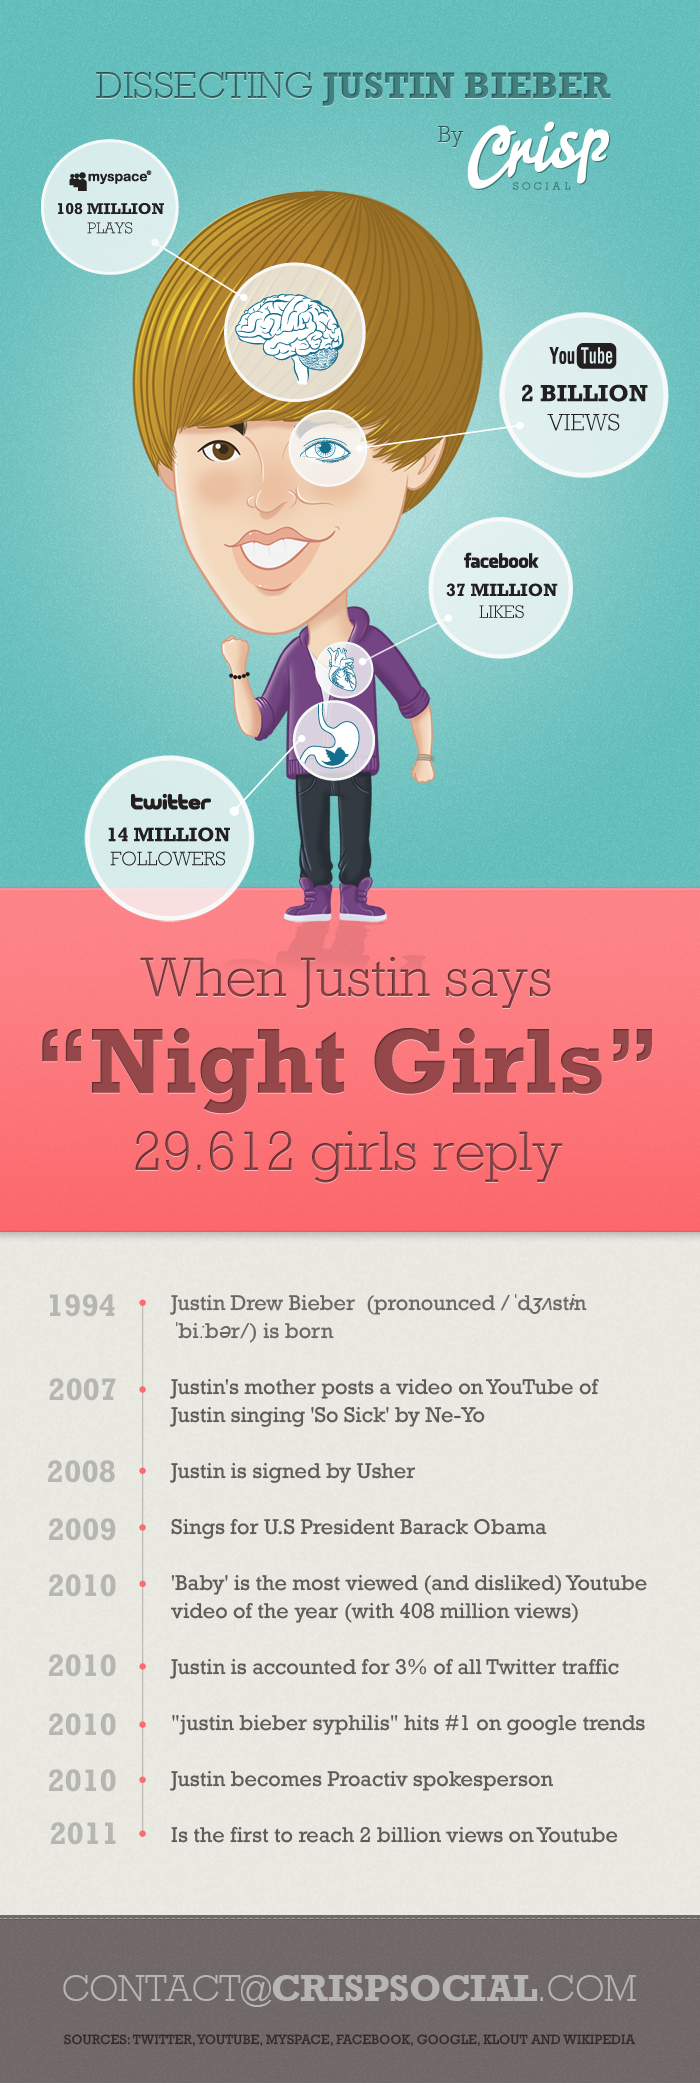 Dissecting Justin Bieber  [INFOGRAPHIC]